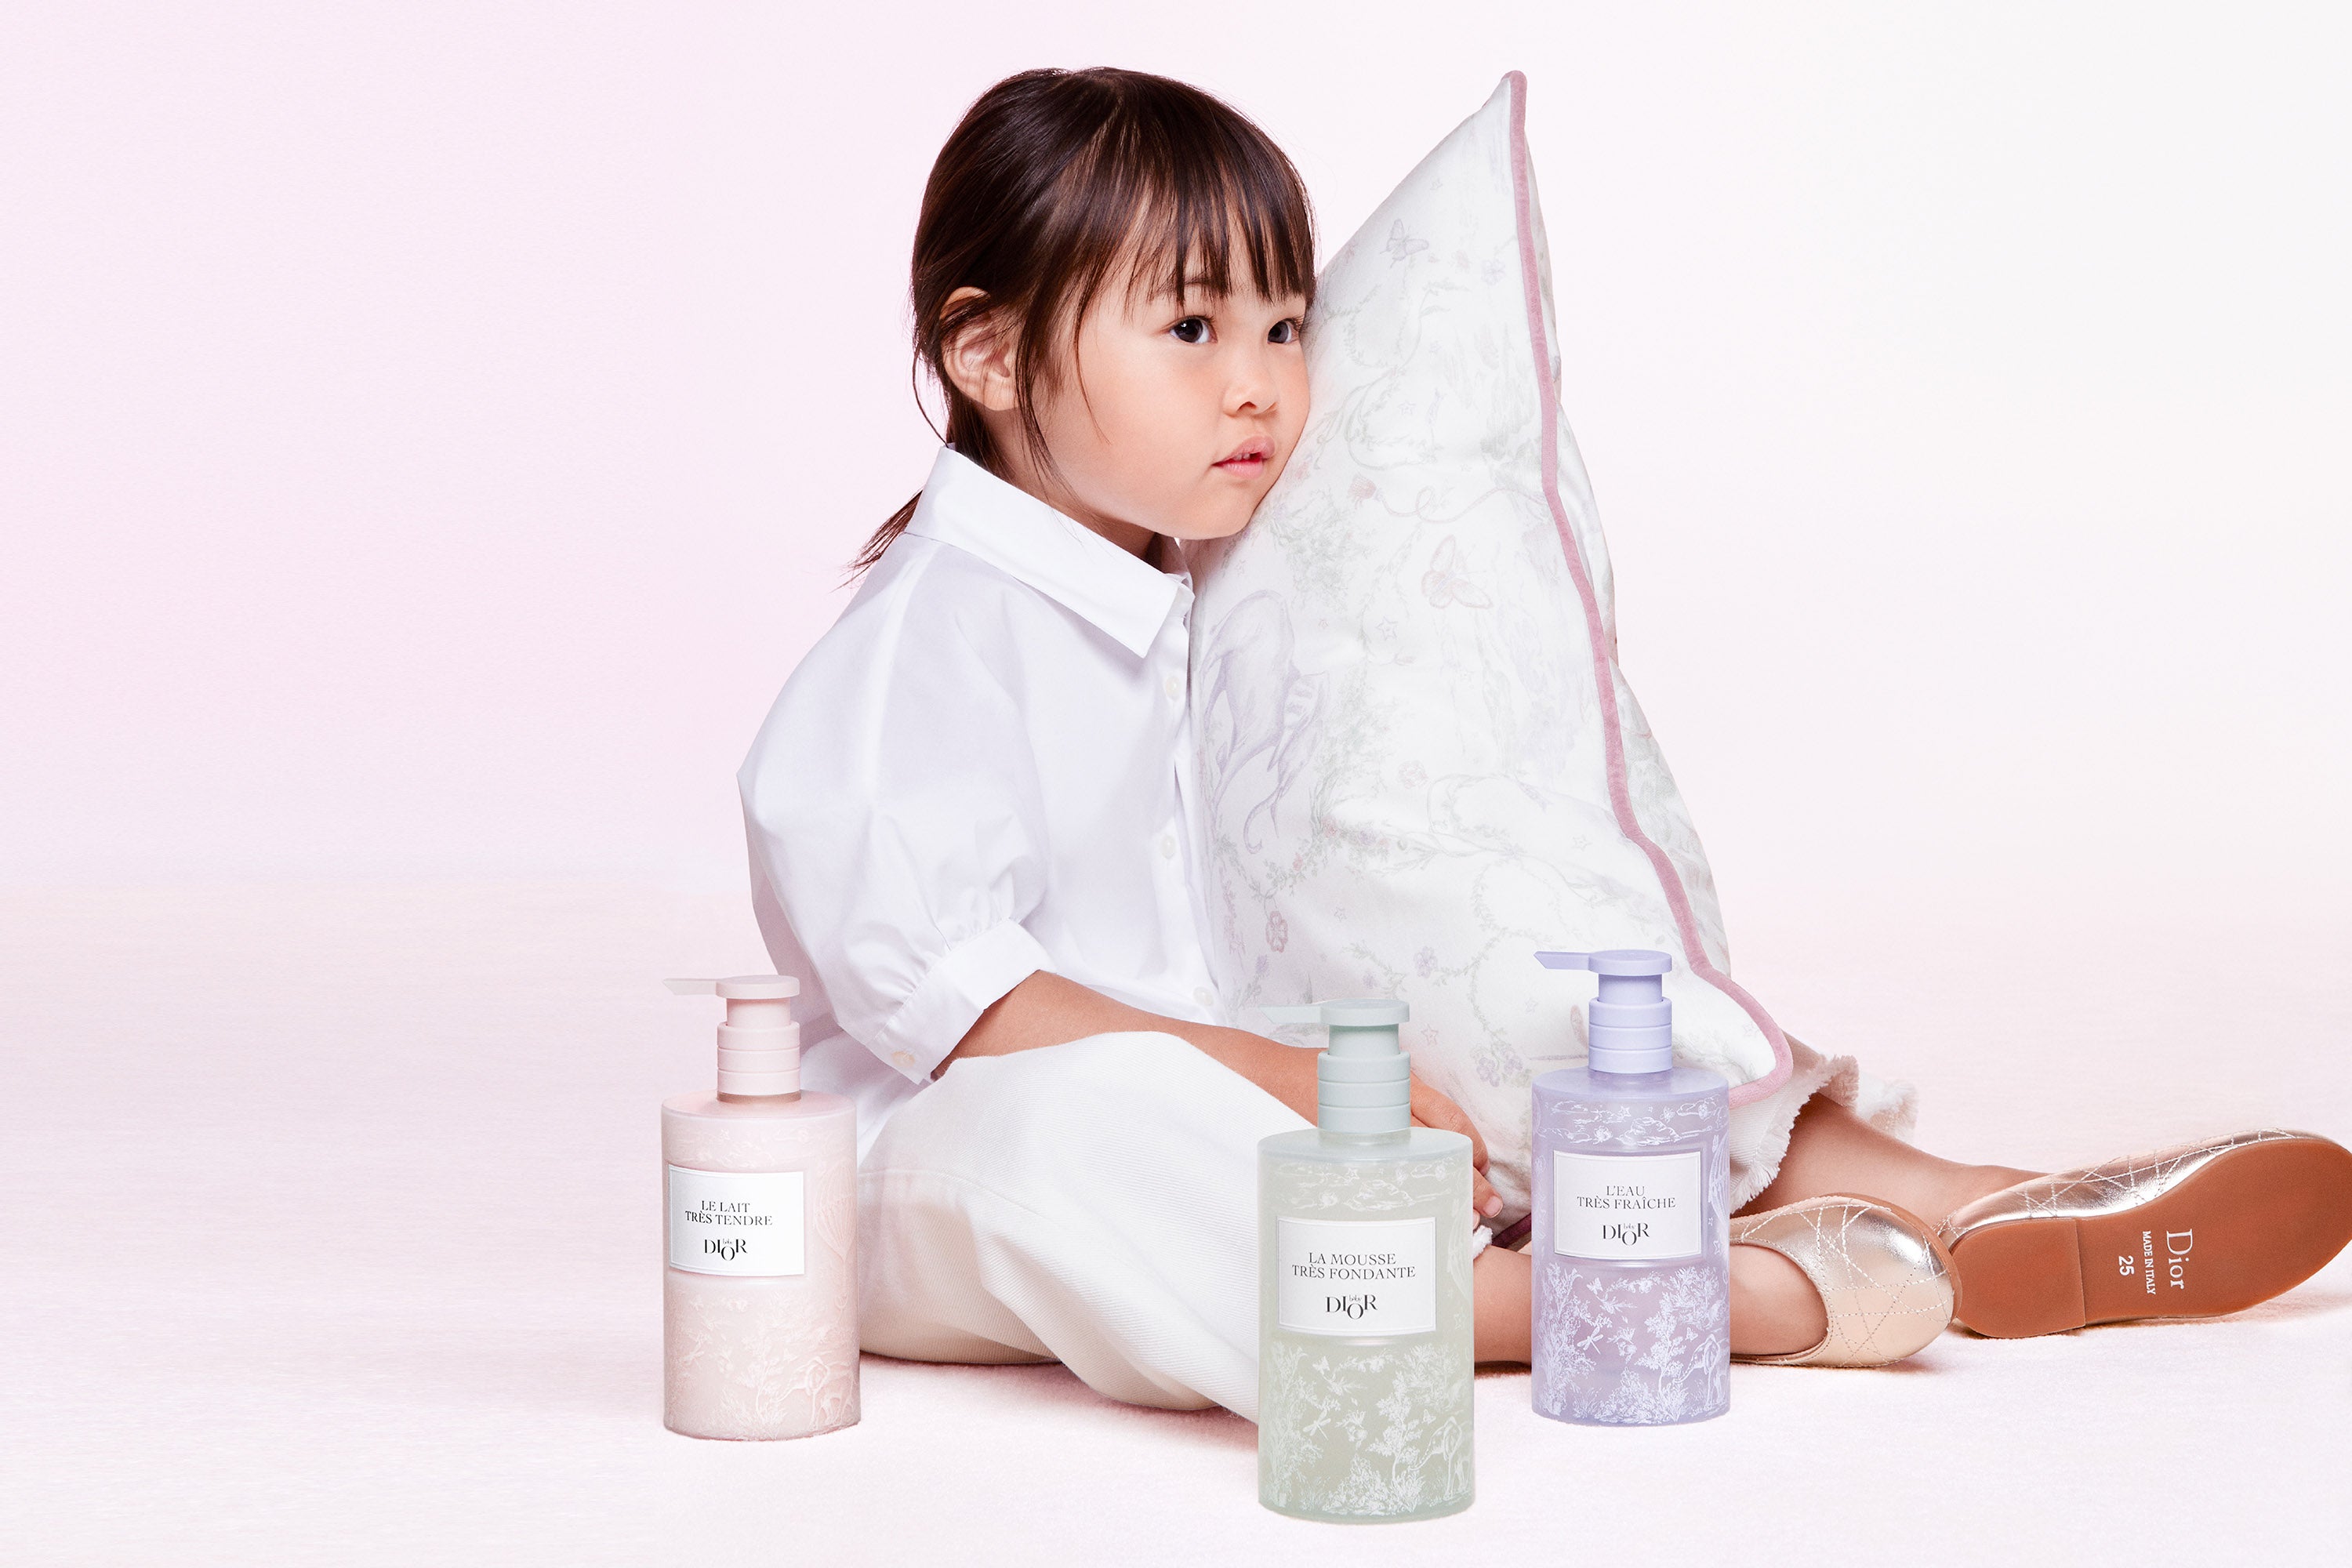 A picture of a little girl lying on a teddy bear blanket looking at Baby Dior baby care.